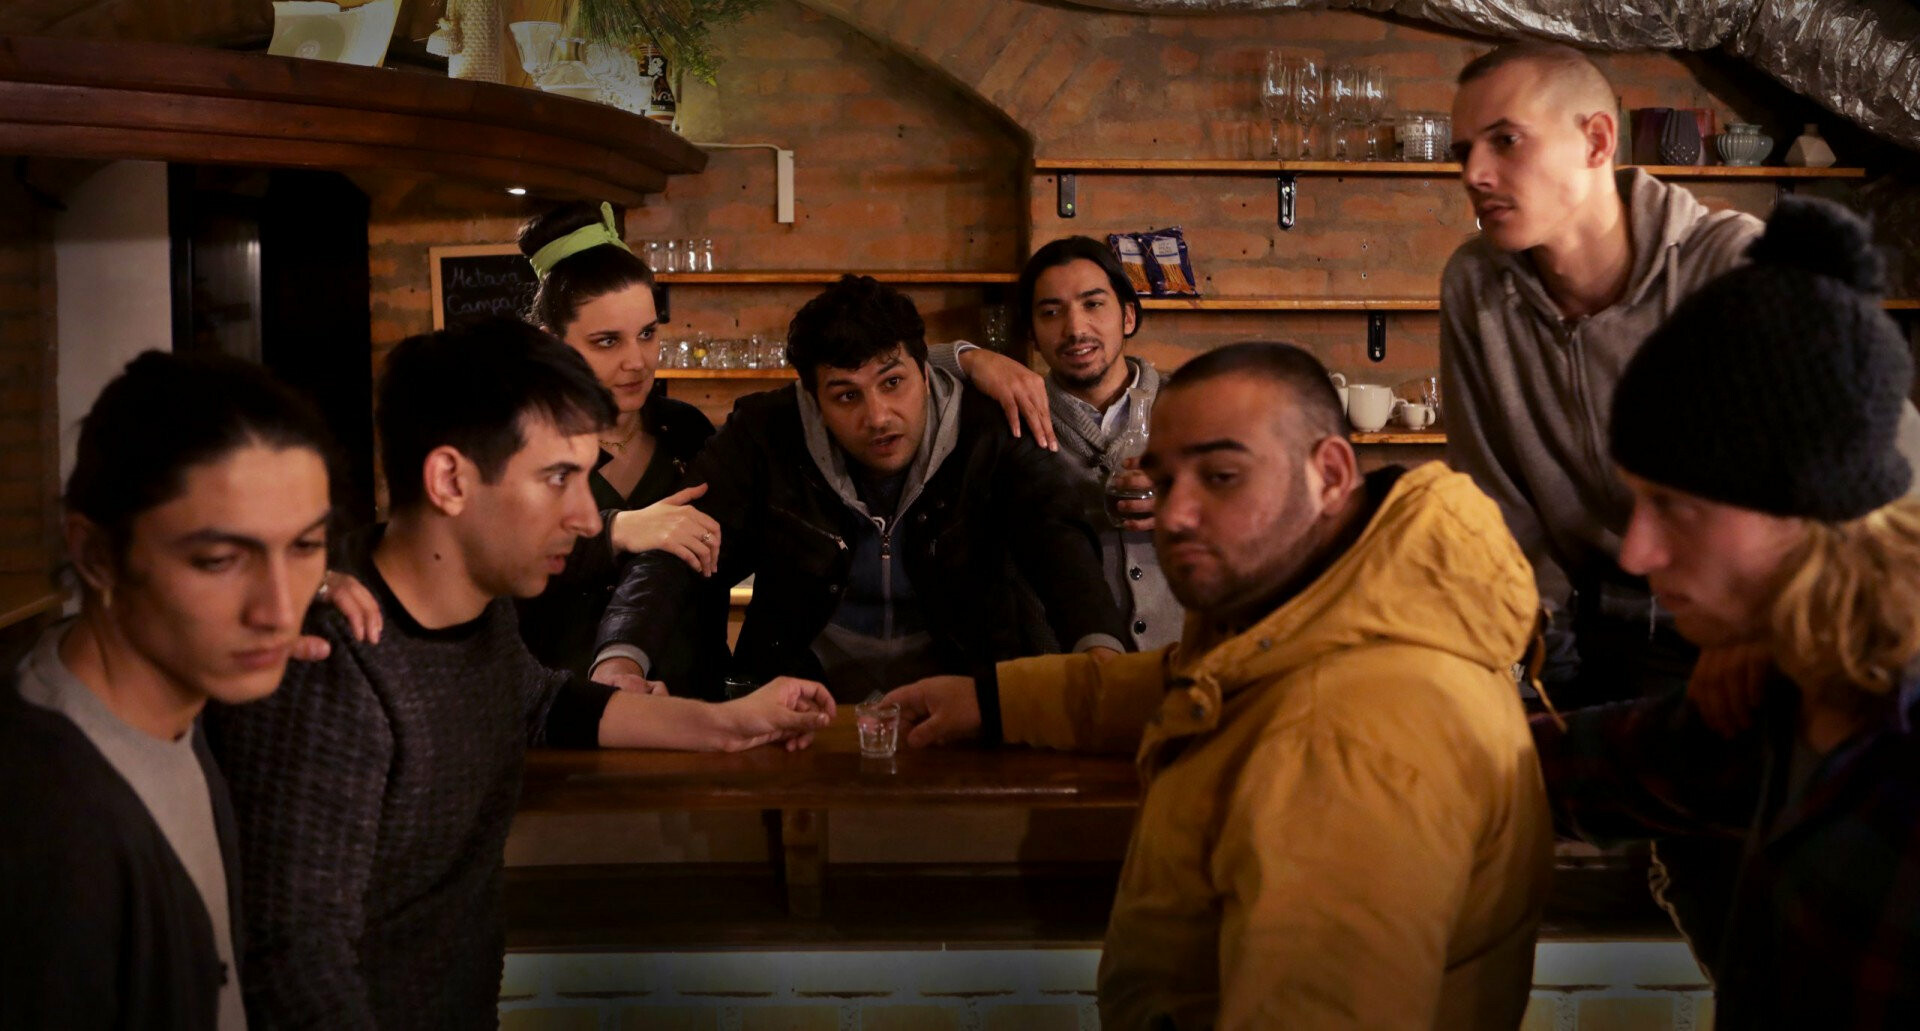 Seven people at a bar table.